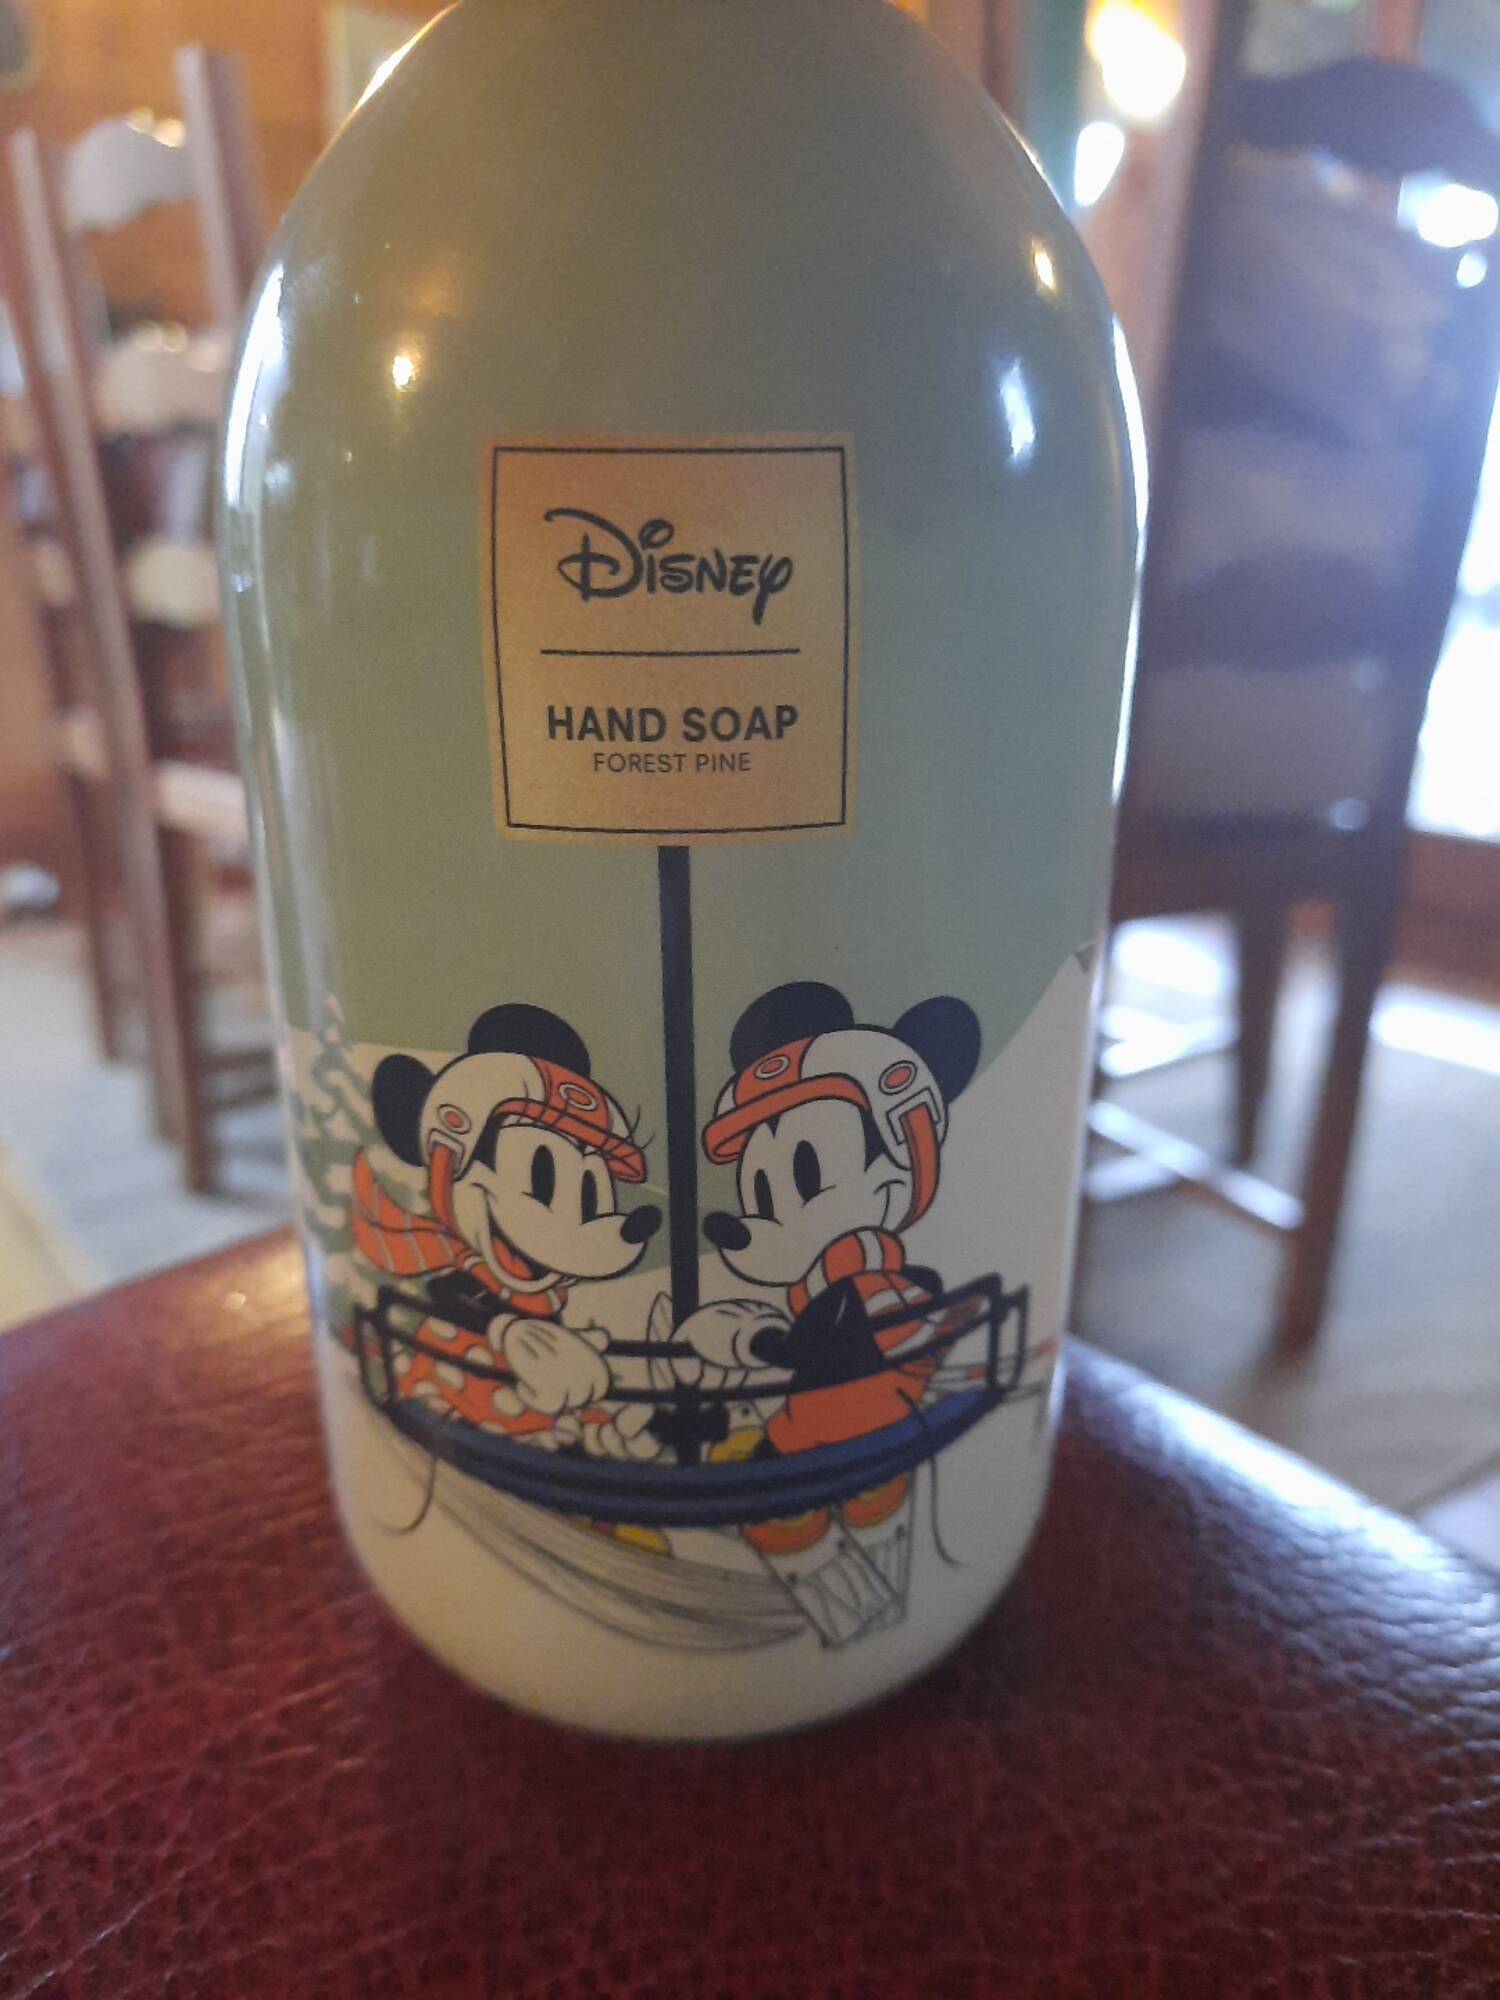 DISNEY - Forest pine - Hand soap